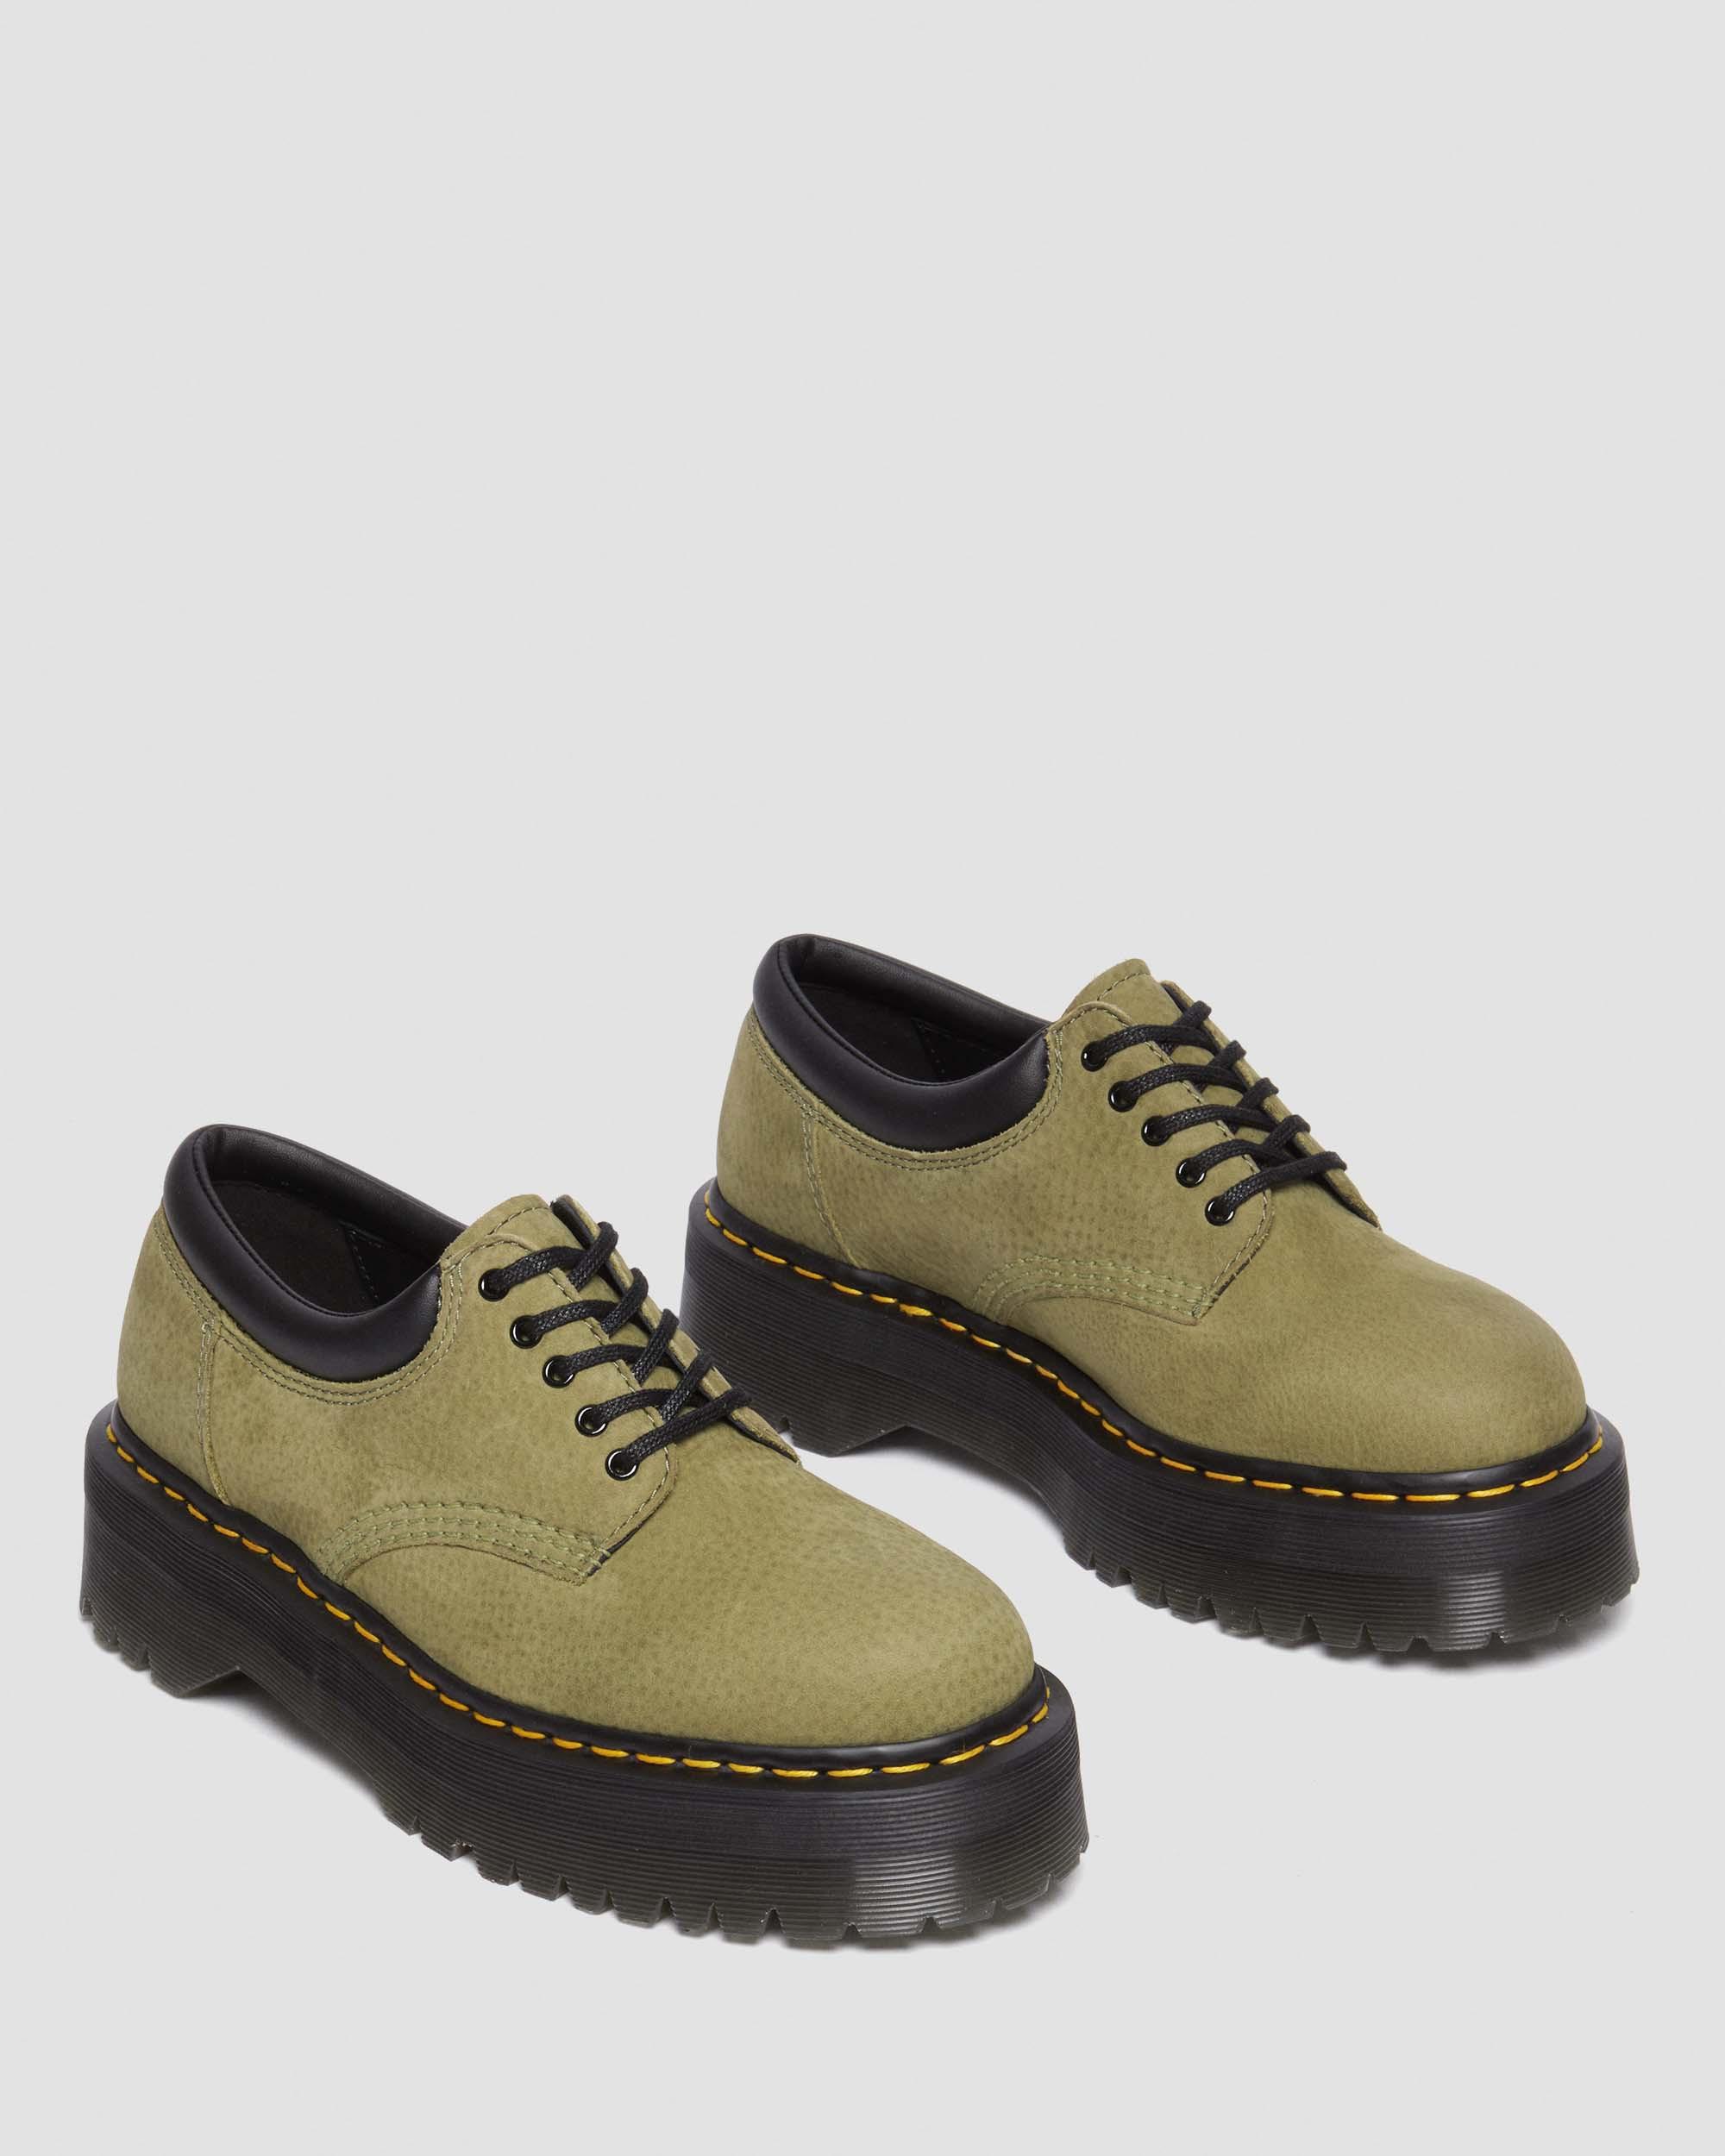 8053 Tumbled Nubuck Leather Platform Shoes in Muted Olive